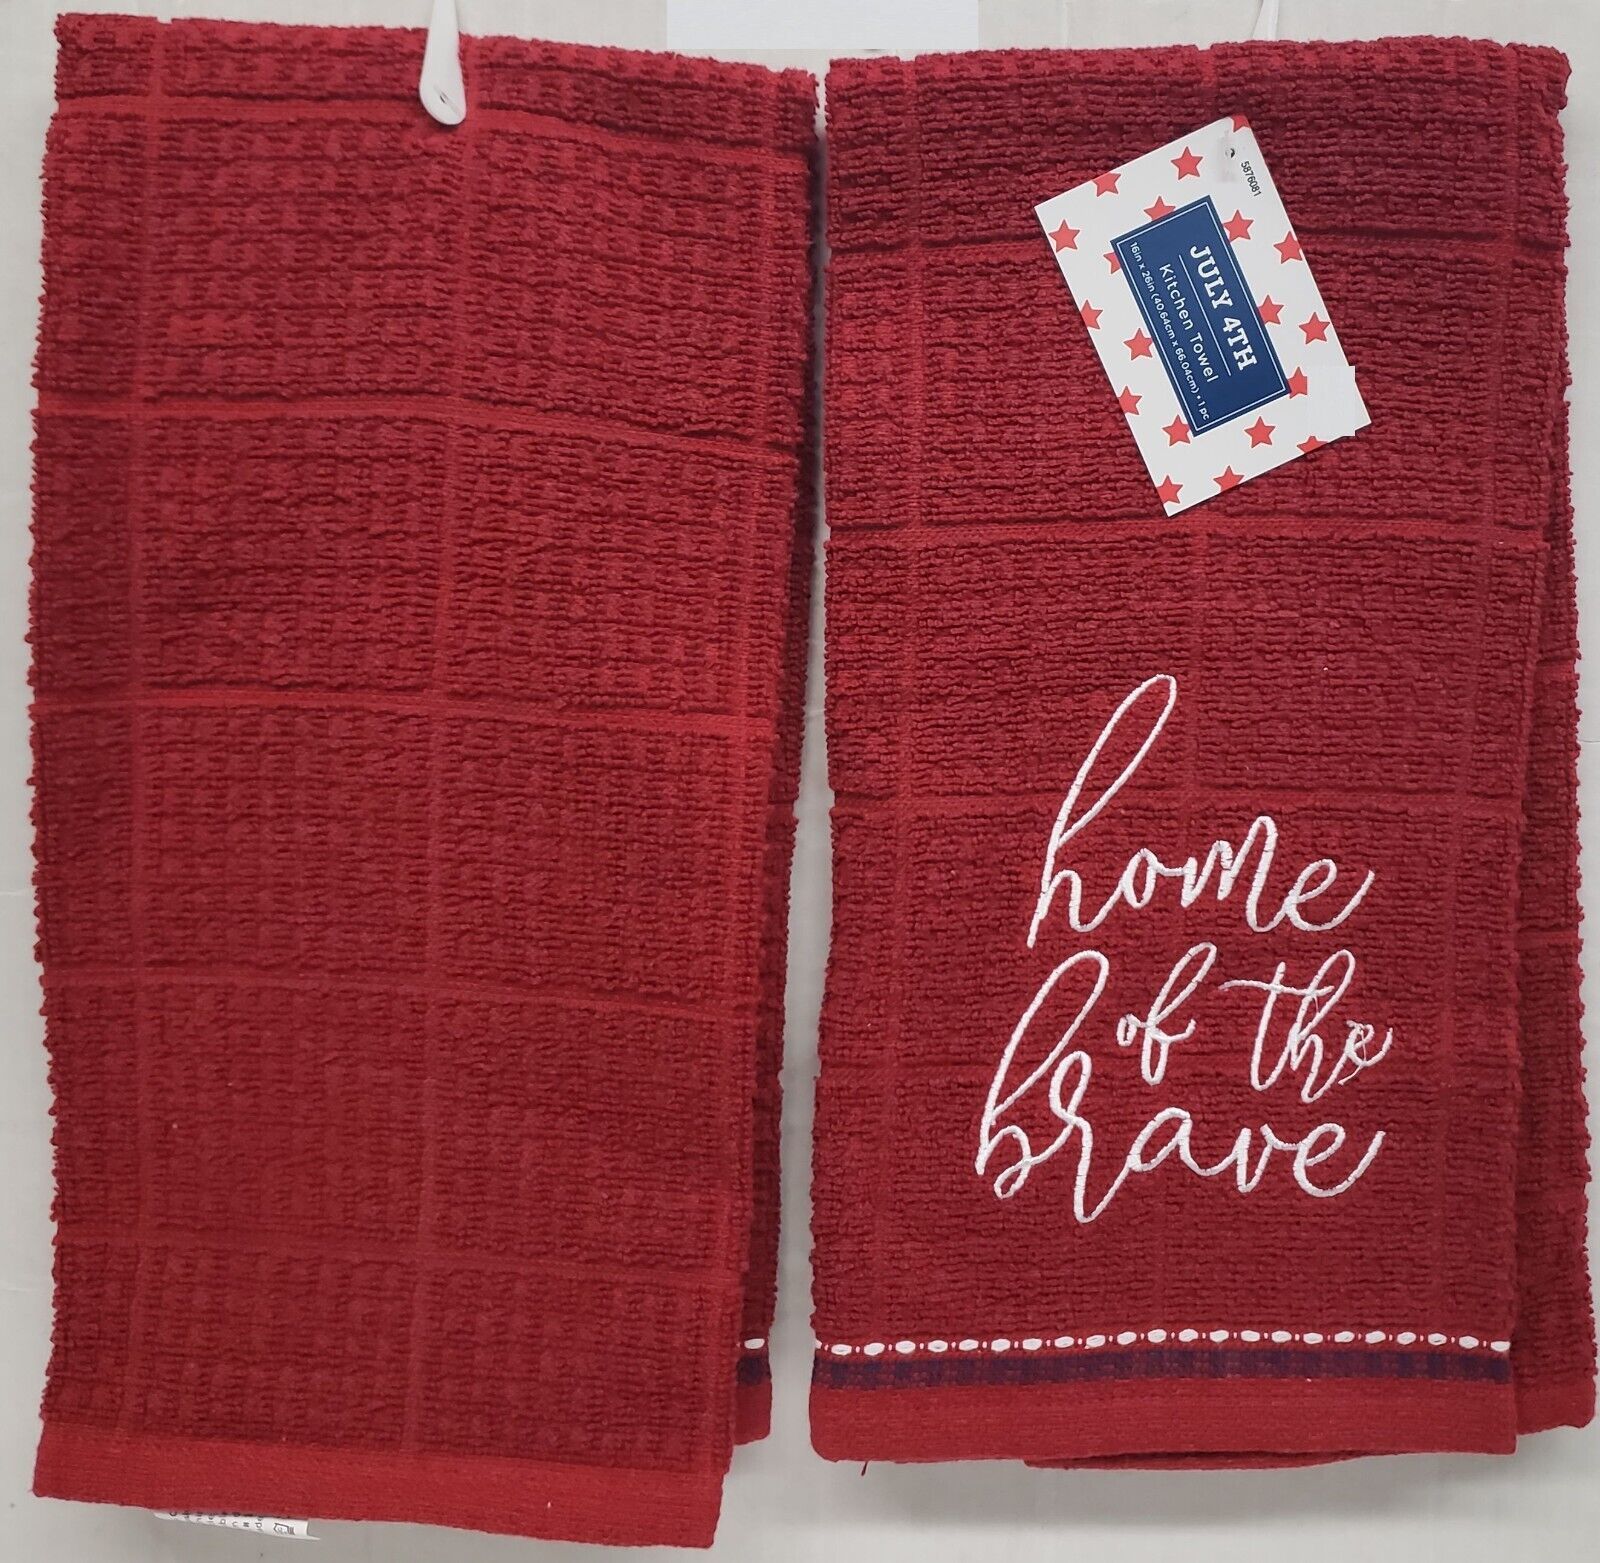 Primary image for Set of 2 Same Embroidered Kitchen Towels(16"x26") PATRIOTIC,HOME OF THE BRAVE,MI